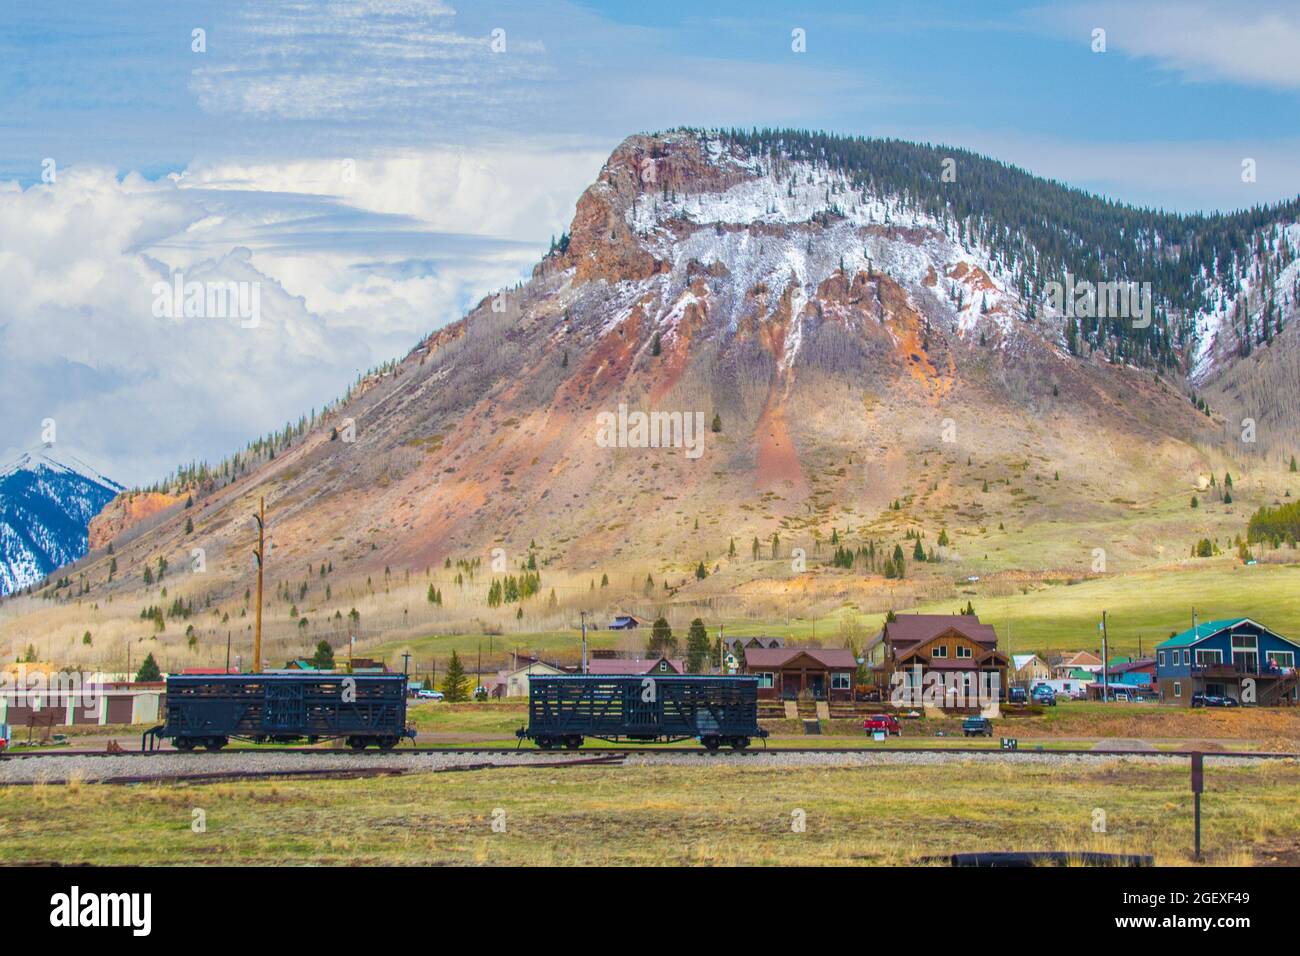 Train cars on track in front of houses in Silverton Colorado with mountains with snow in background. Stock Photo